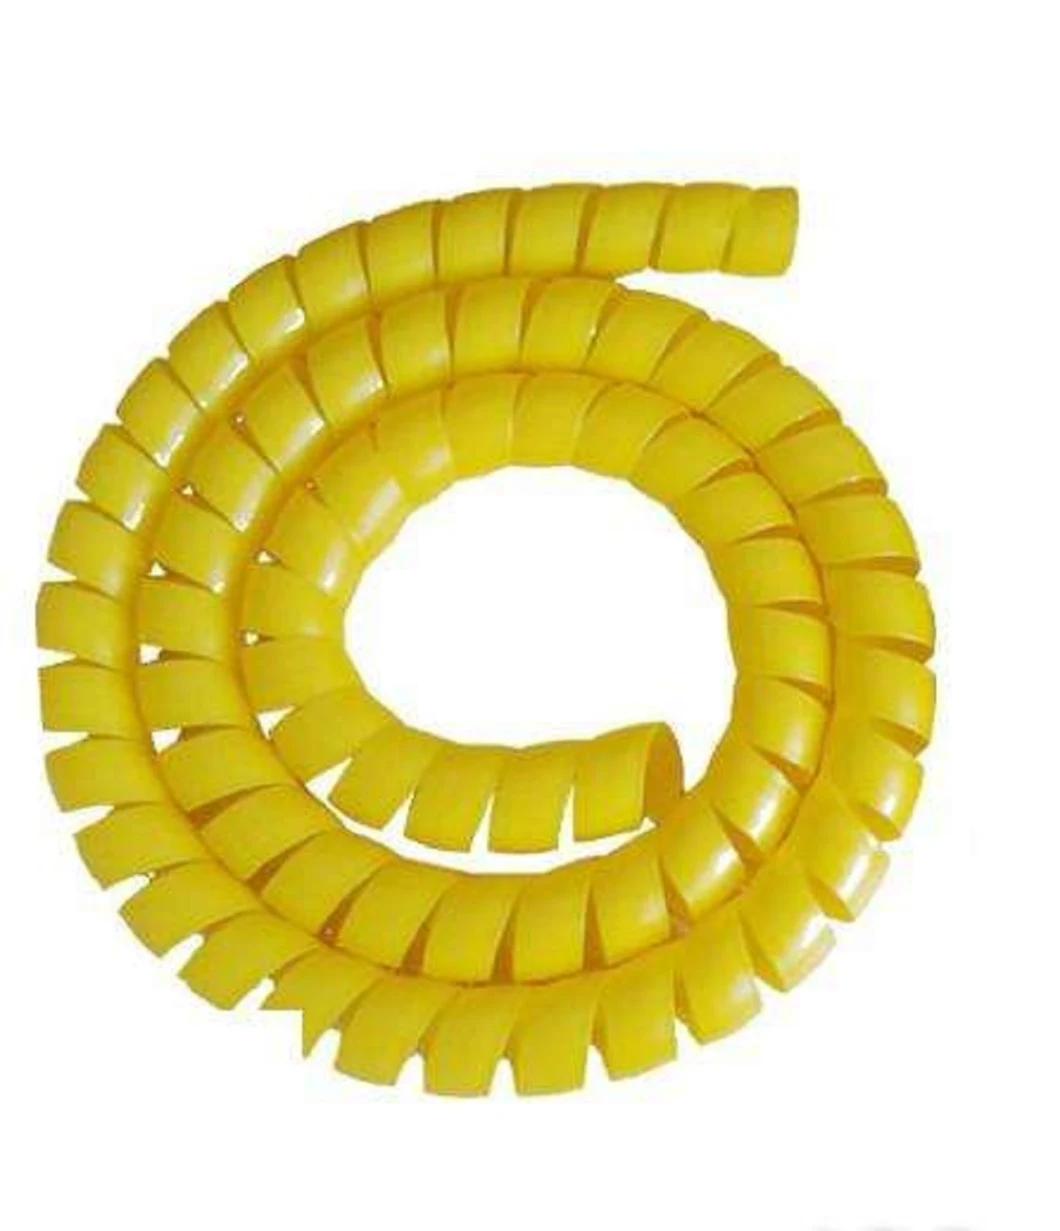 Spiral Protective Sleeve/Hose Guard for Hydraulic Protection Hose Pipe